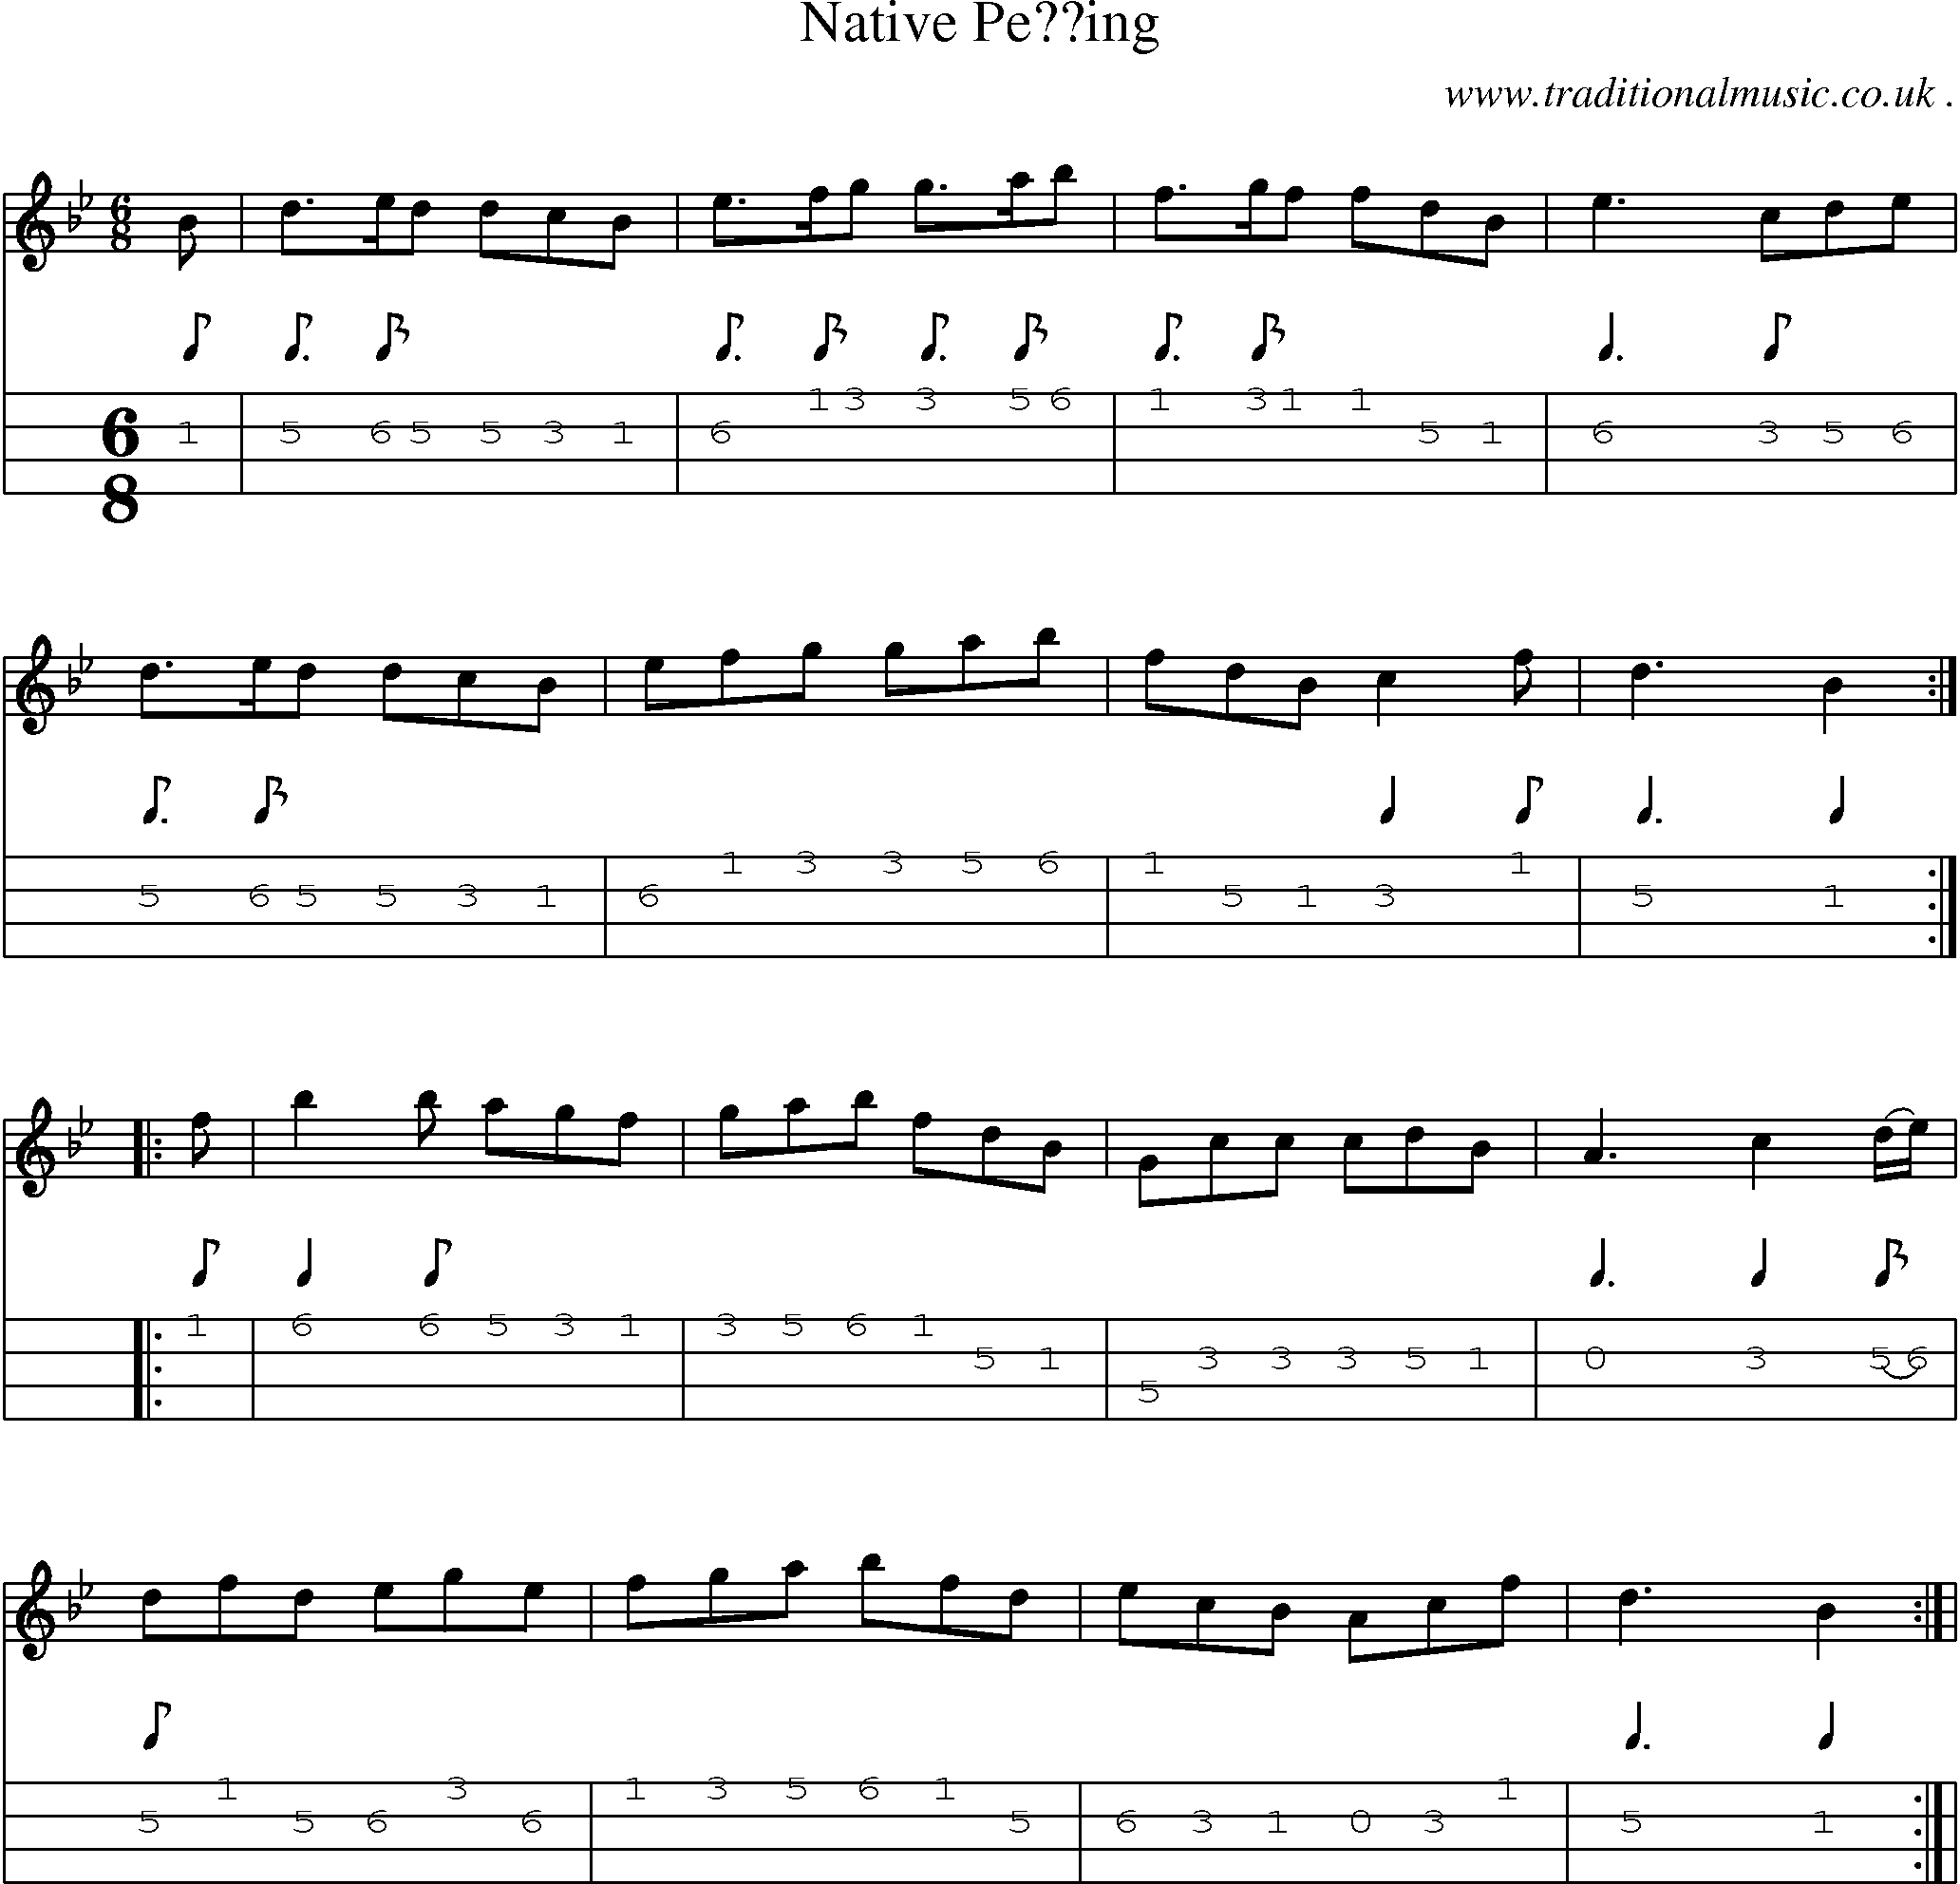 Sheet-Music and Mandolin Tabs for Native Peing